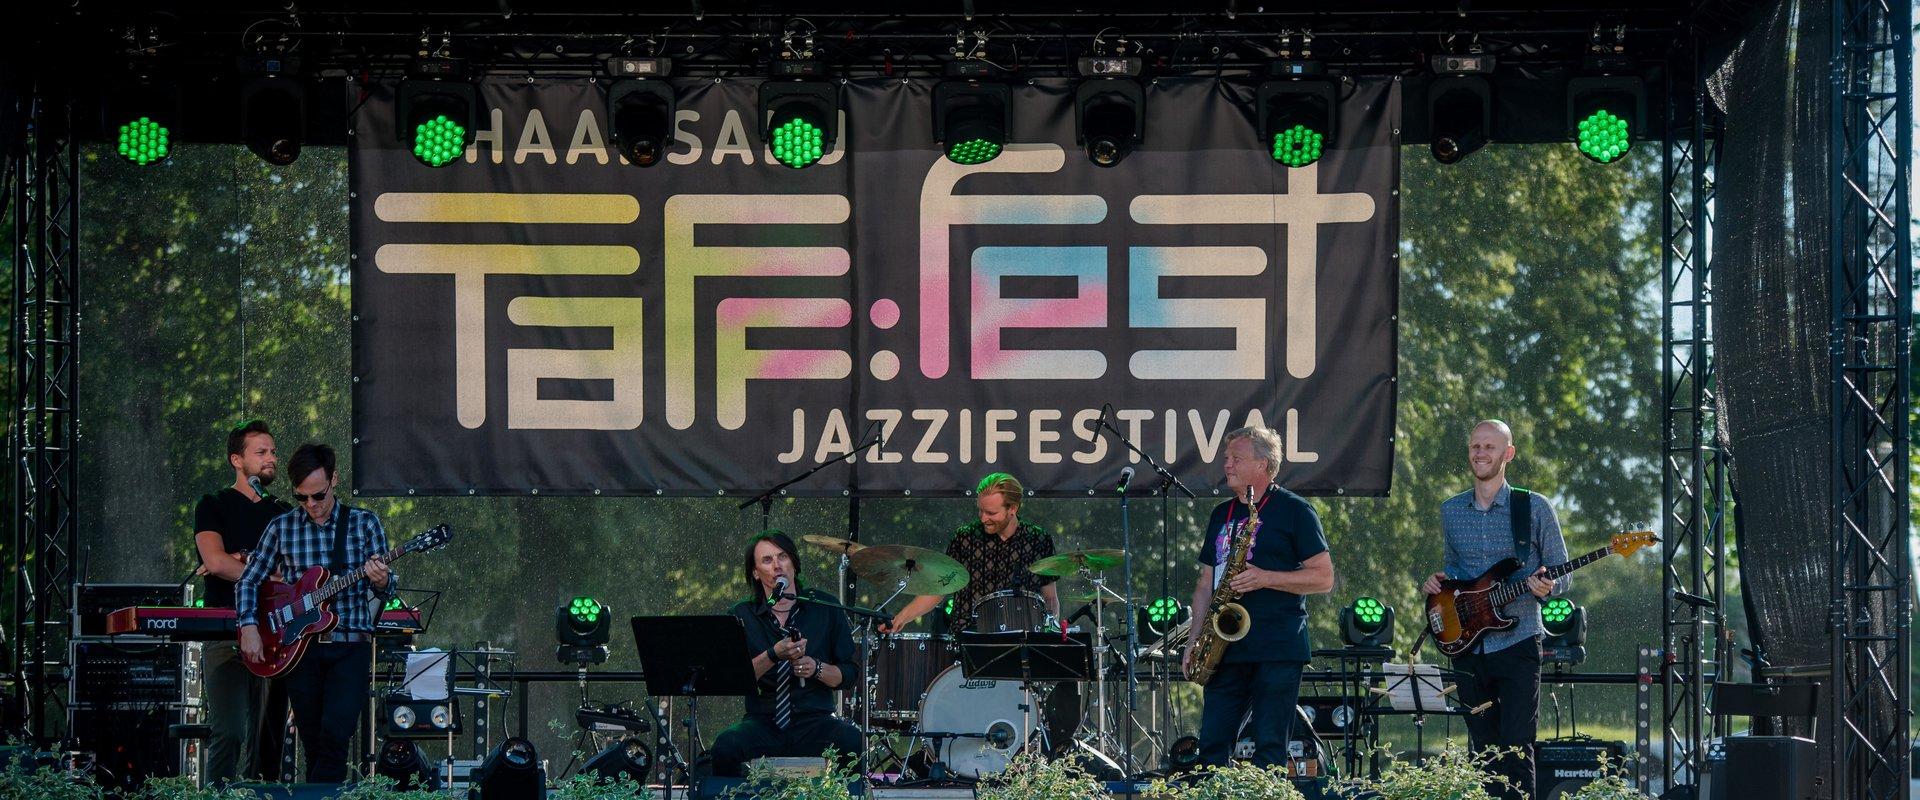 TAFF:fest melts the best Estonian jazz music and the spirit of the beautiful town of Haapsalu together into one fun event. This is a meetingplace for 